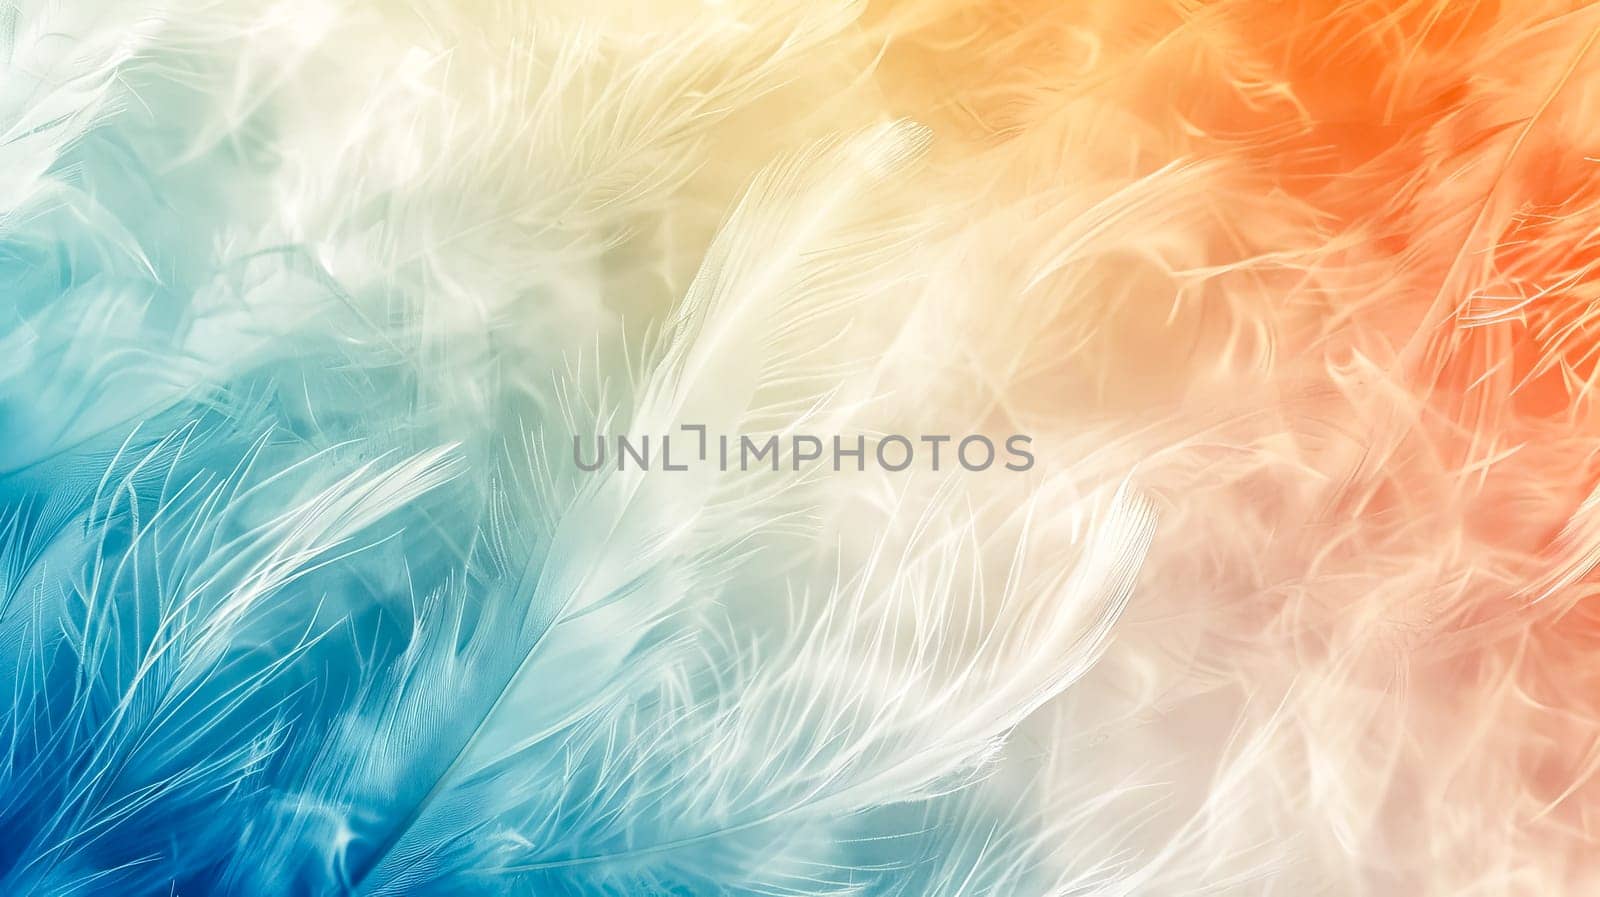 Vibrant and soft feathers in a close-up with a dreamscape quality by Edophoto